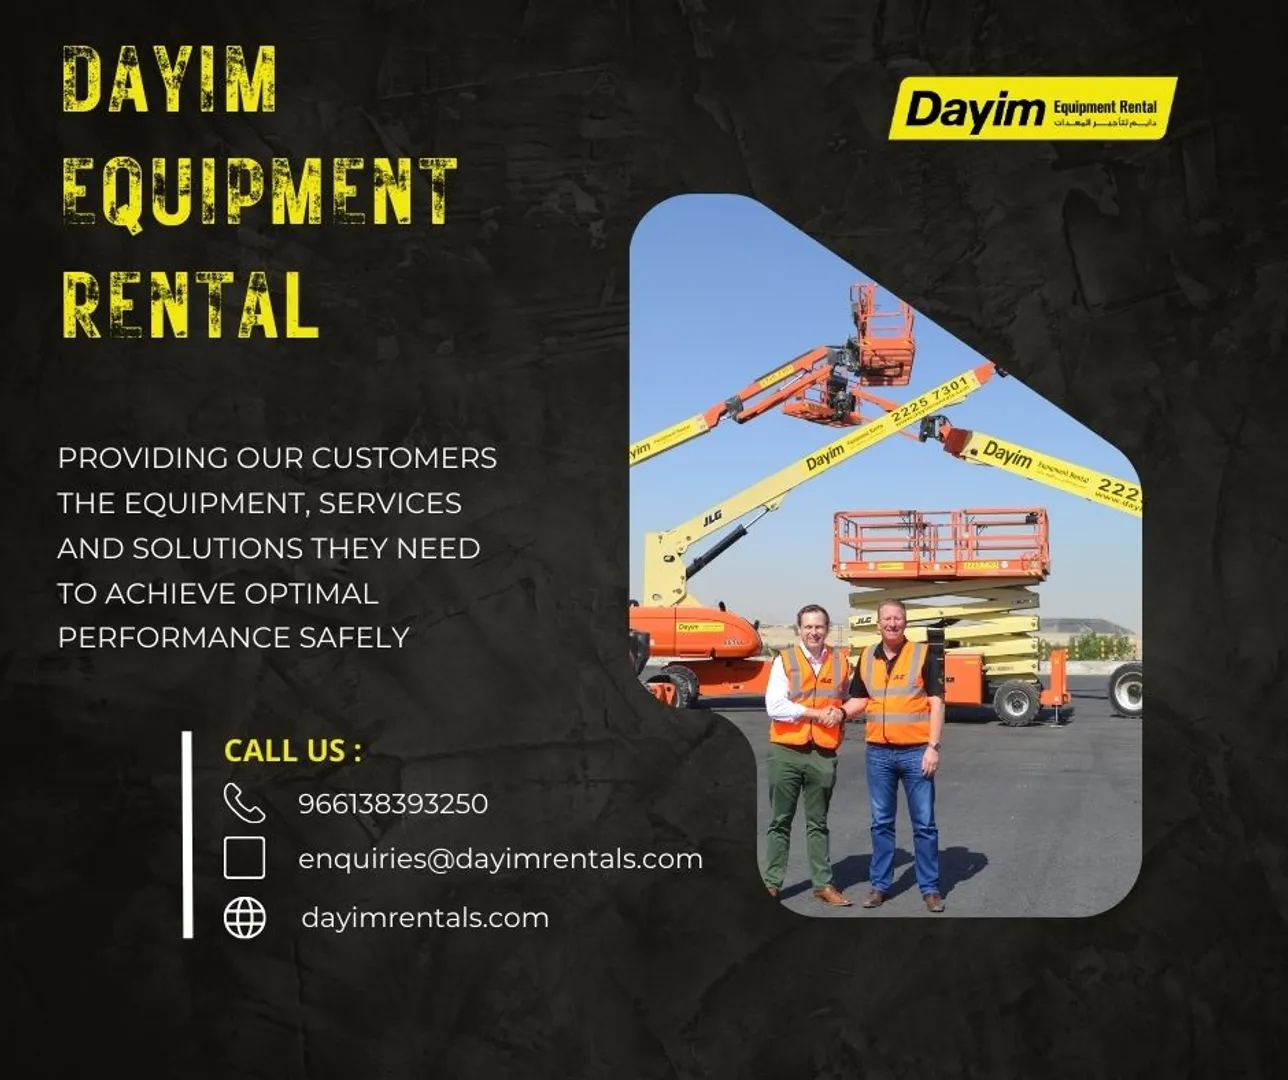 Best Access Platform Rental

Access platforms give workers a temporary or permanent way to work at various heights. They come in a variety of configurations and are featured in jobs ranging from utility maintenance to grain processing. we are here to giving o service for access platform rental. 

https://dayimrentals.com/